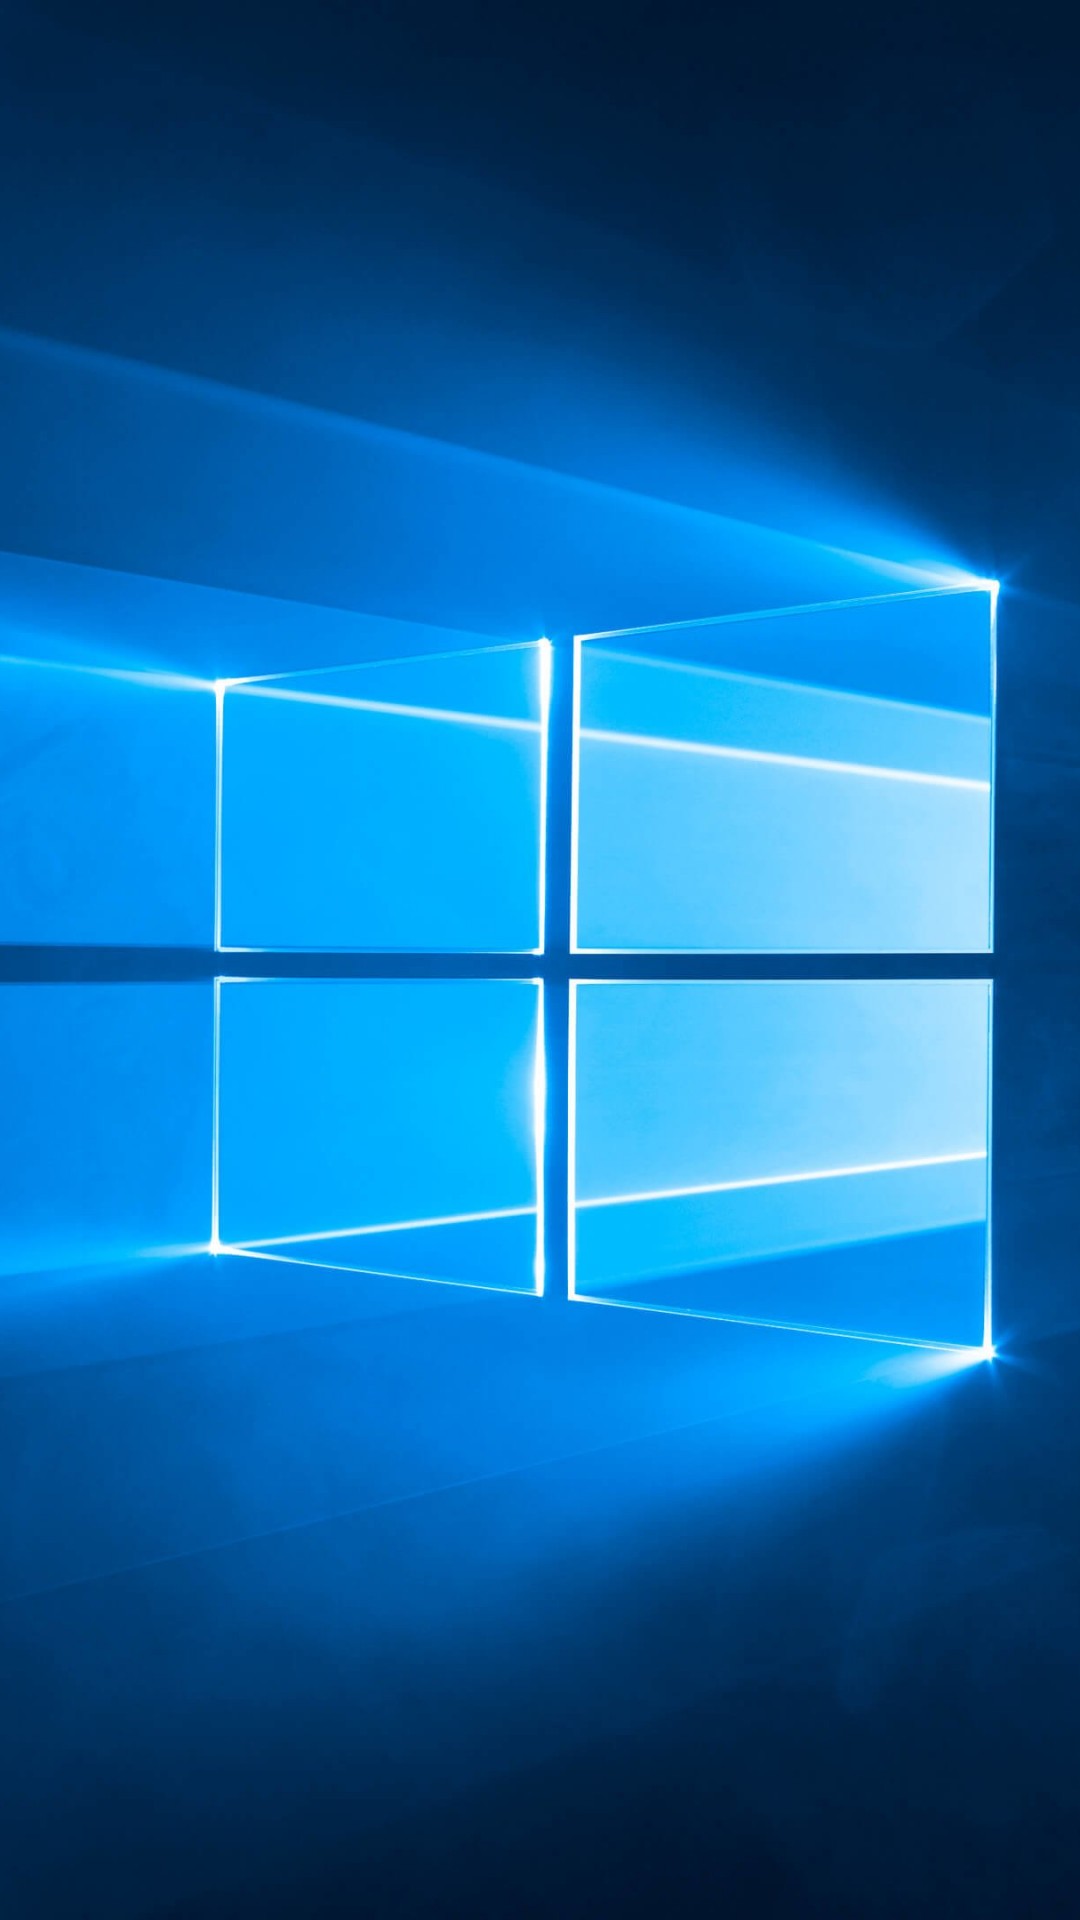 Windows 10 Official Wallpaper for SAMSUNG Galaxy S5